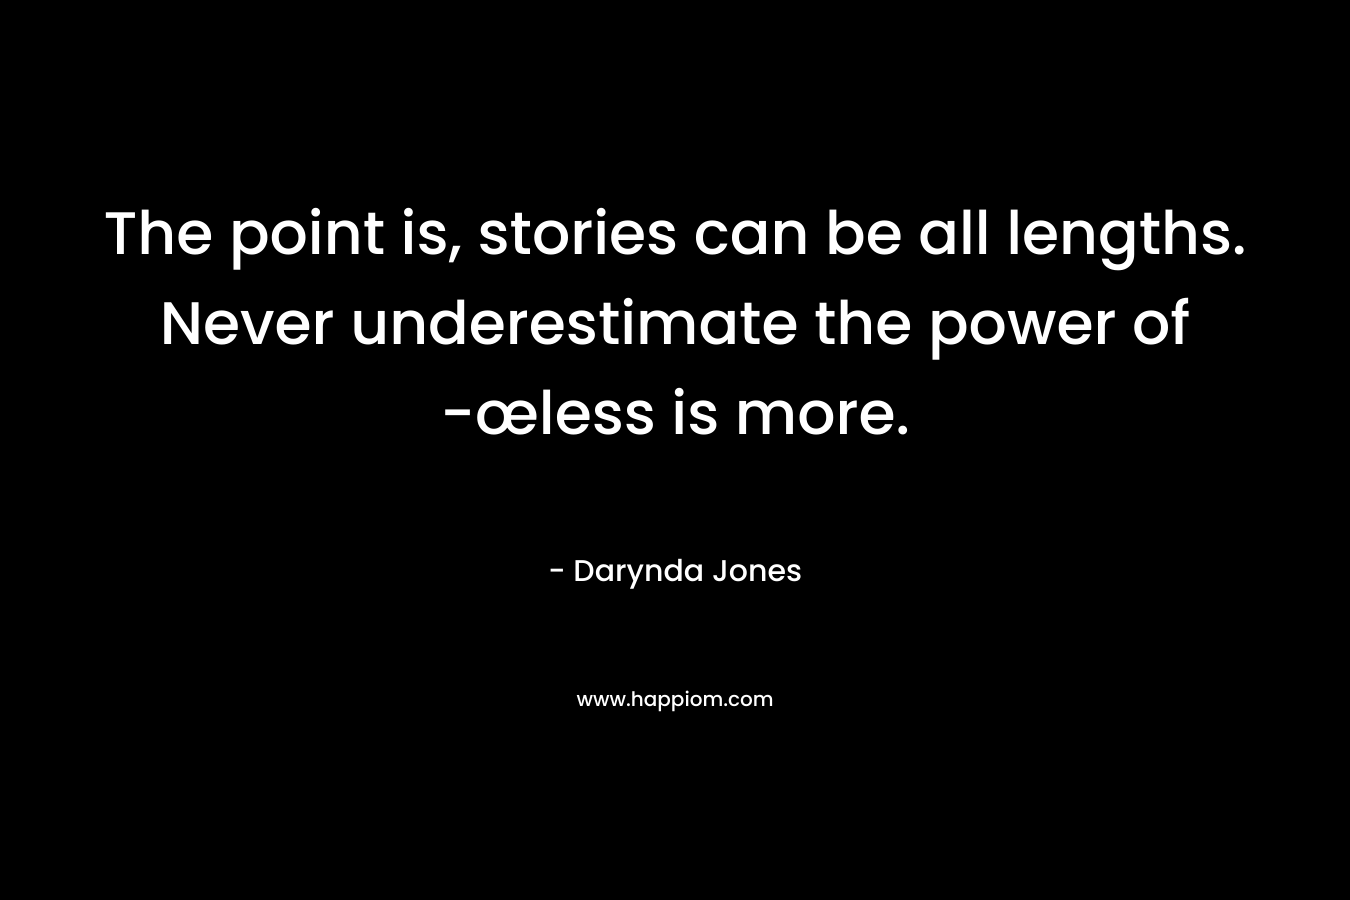 The point is, stories can be all lengths. Never underestimate the power of -œless is more. – Darynda Jones